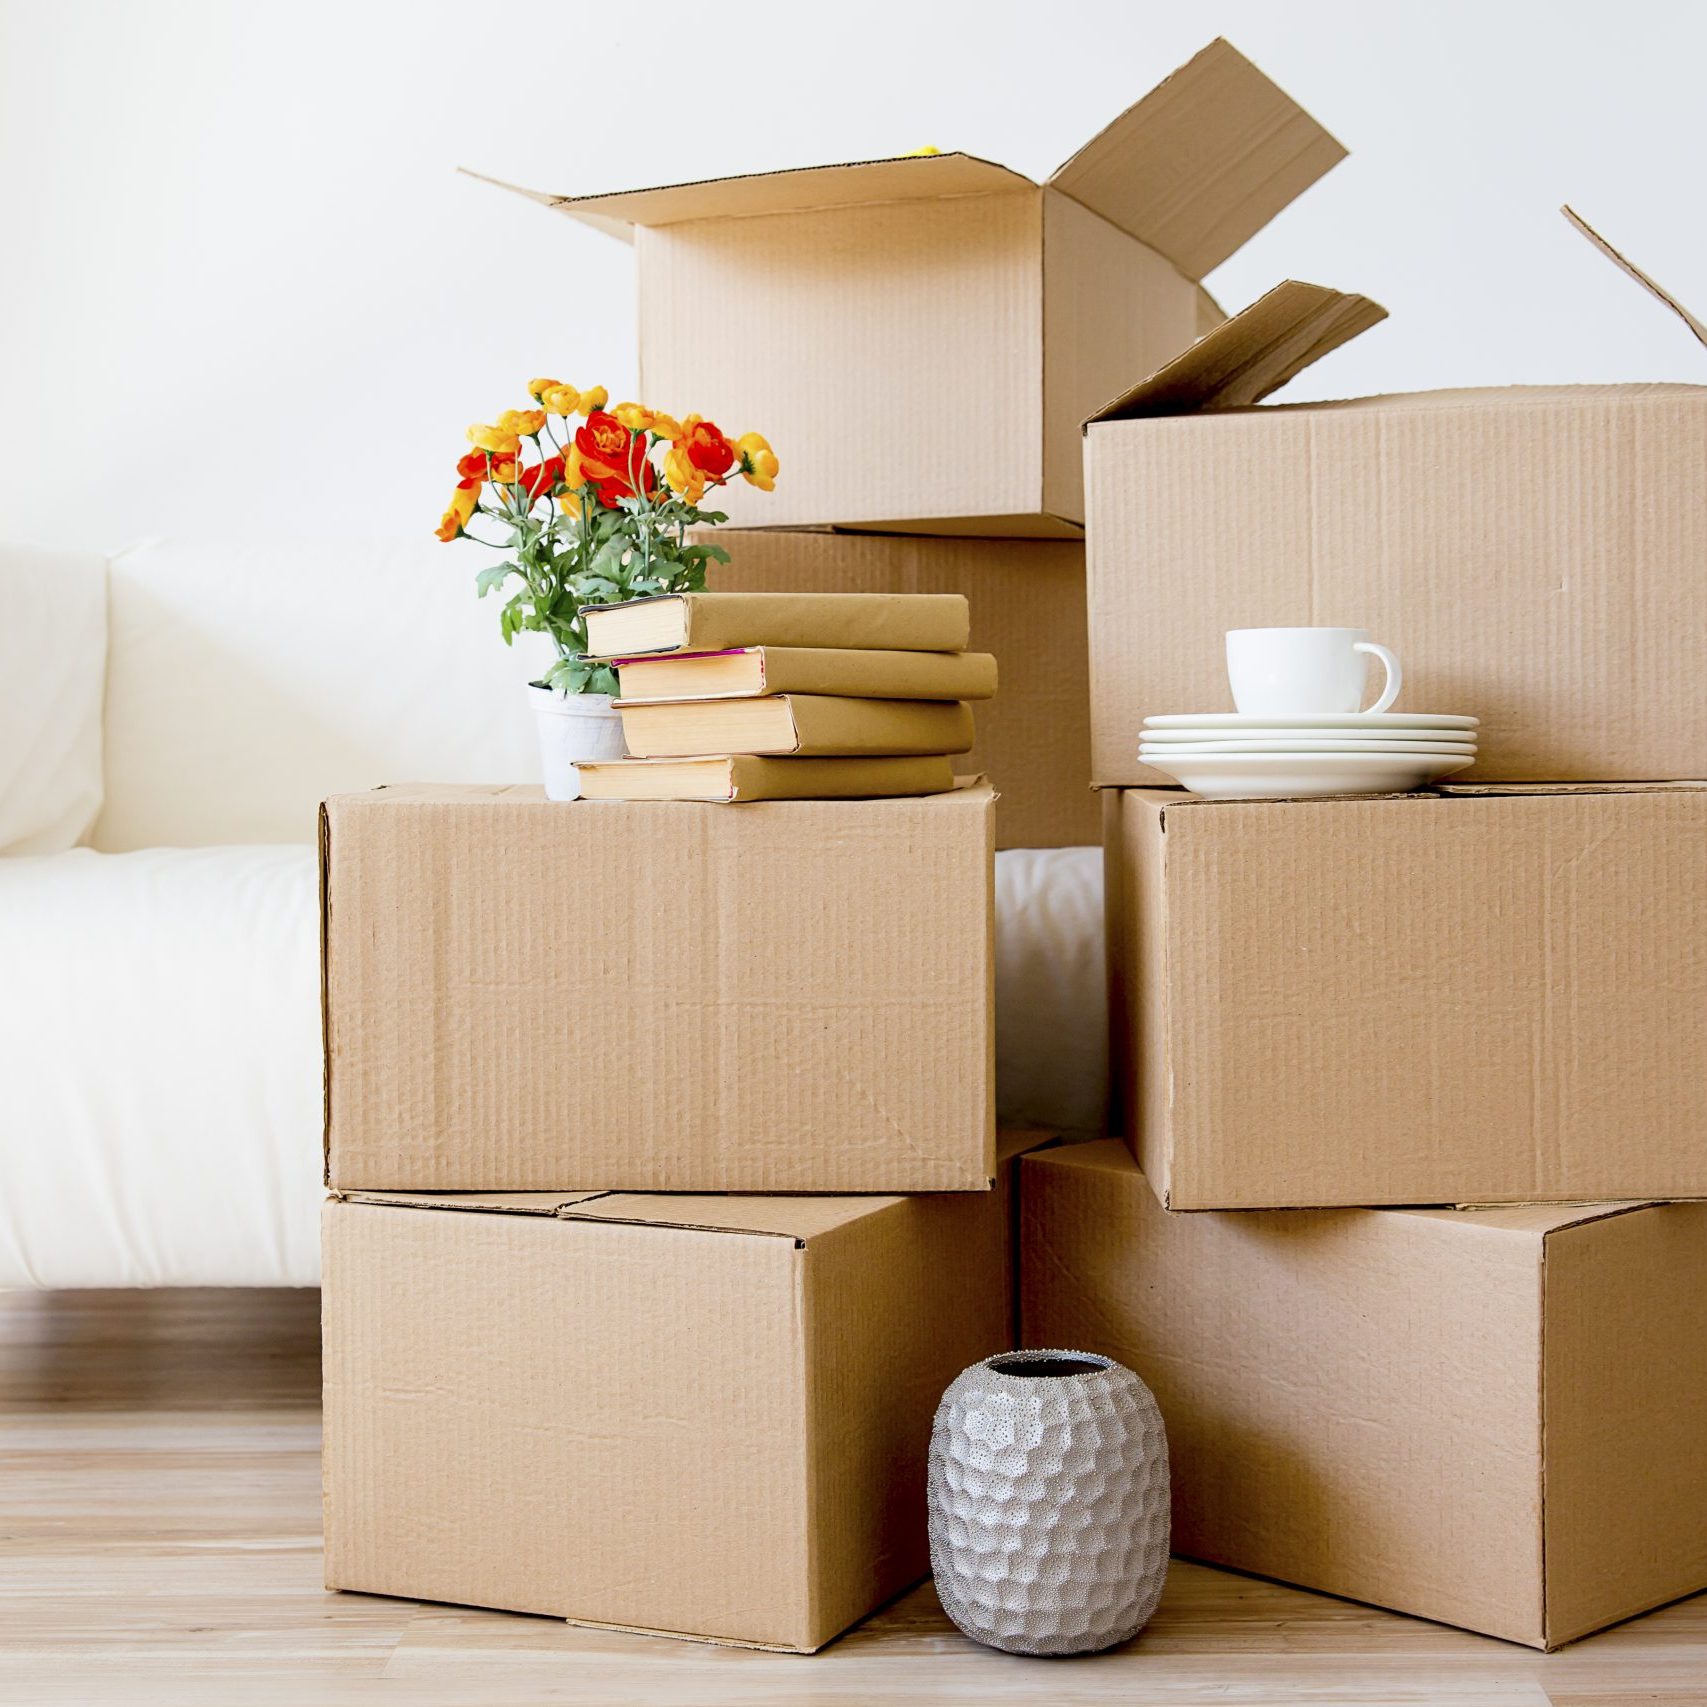 Cardboard,Boxes,-,Moving,To,A,New,House